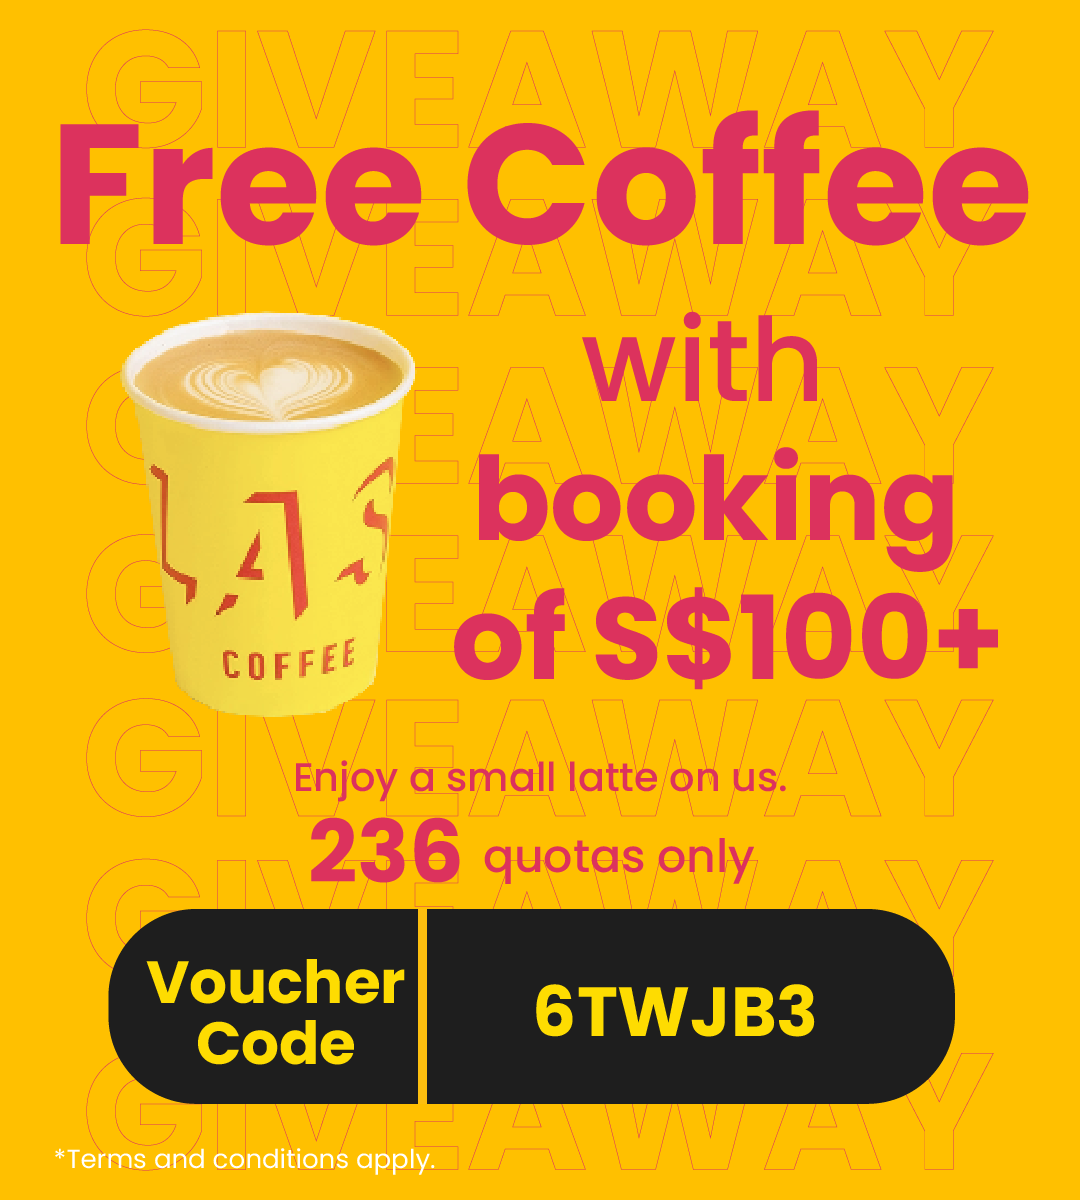 Member Exclusive: Free Latte at Flash Coffee on Daycation booking of S$100+